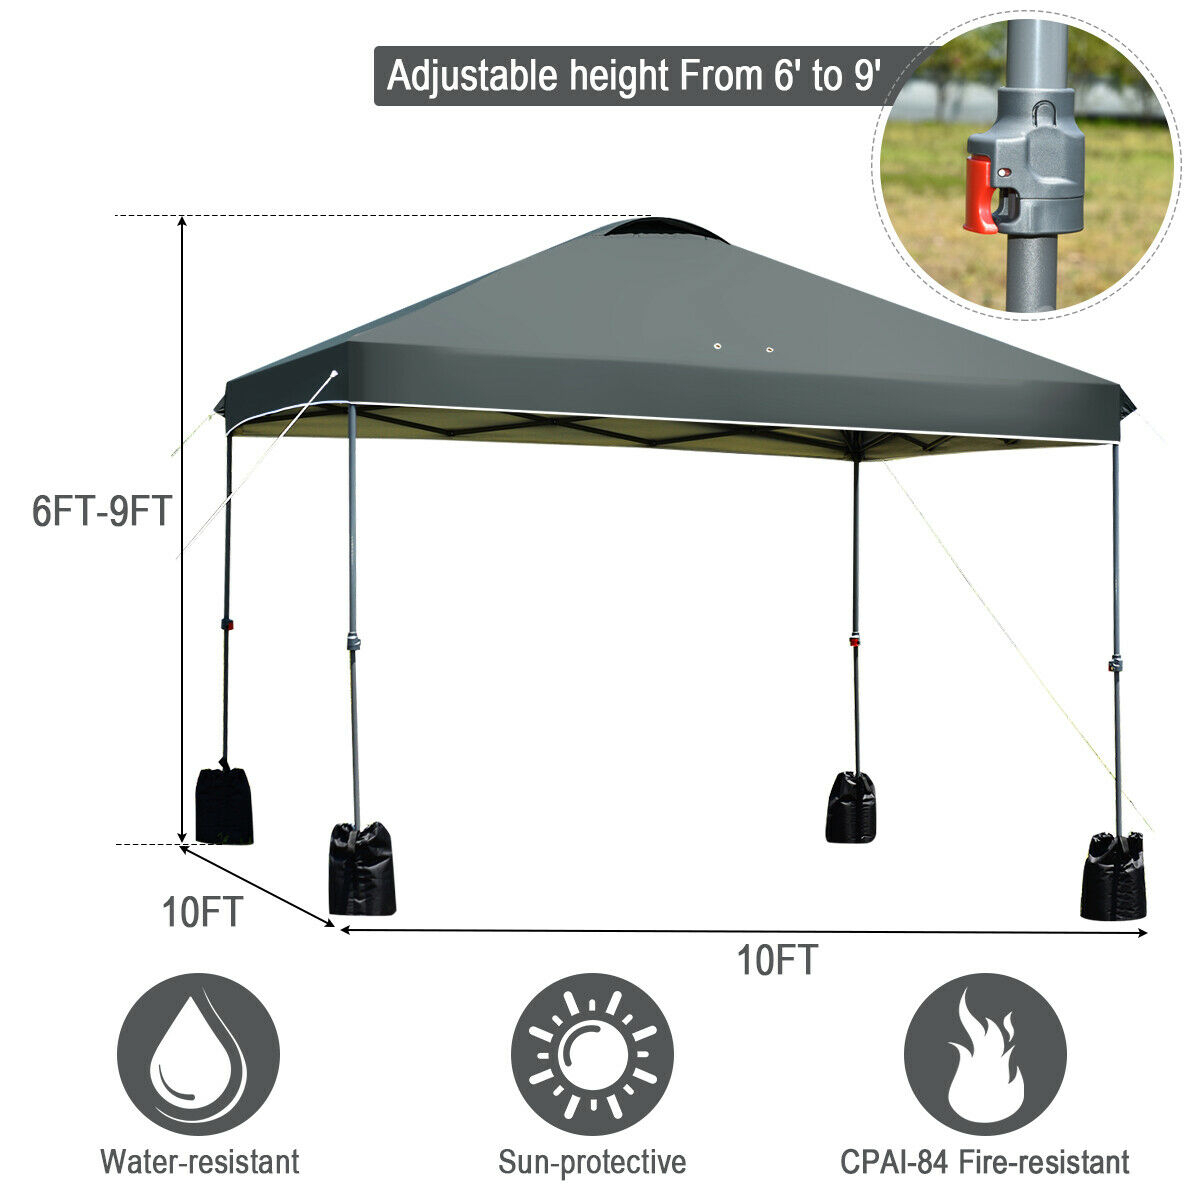 Gymax 10x10 FT Pop Up Canopy Tent Wheeled Carry Bag 4 Canopy Sand Bag - Gray